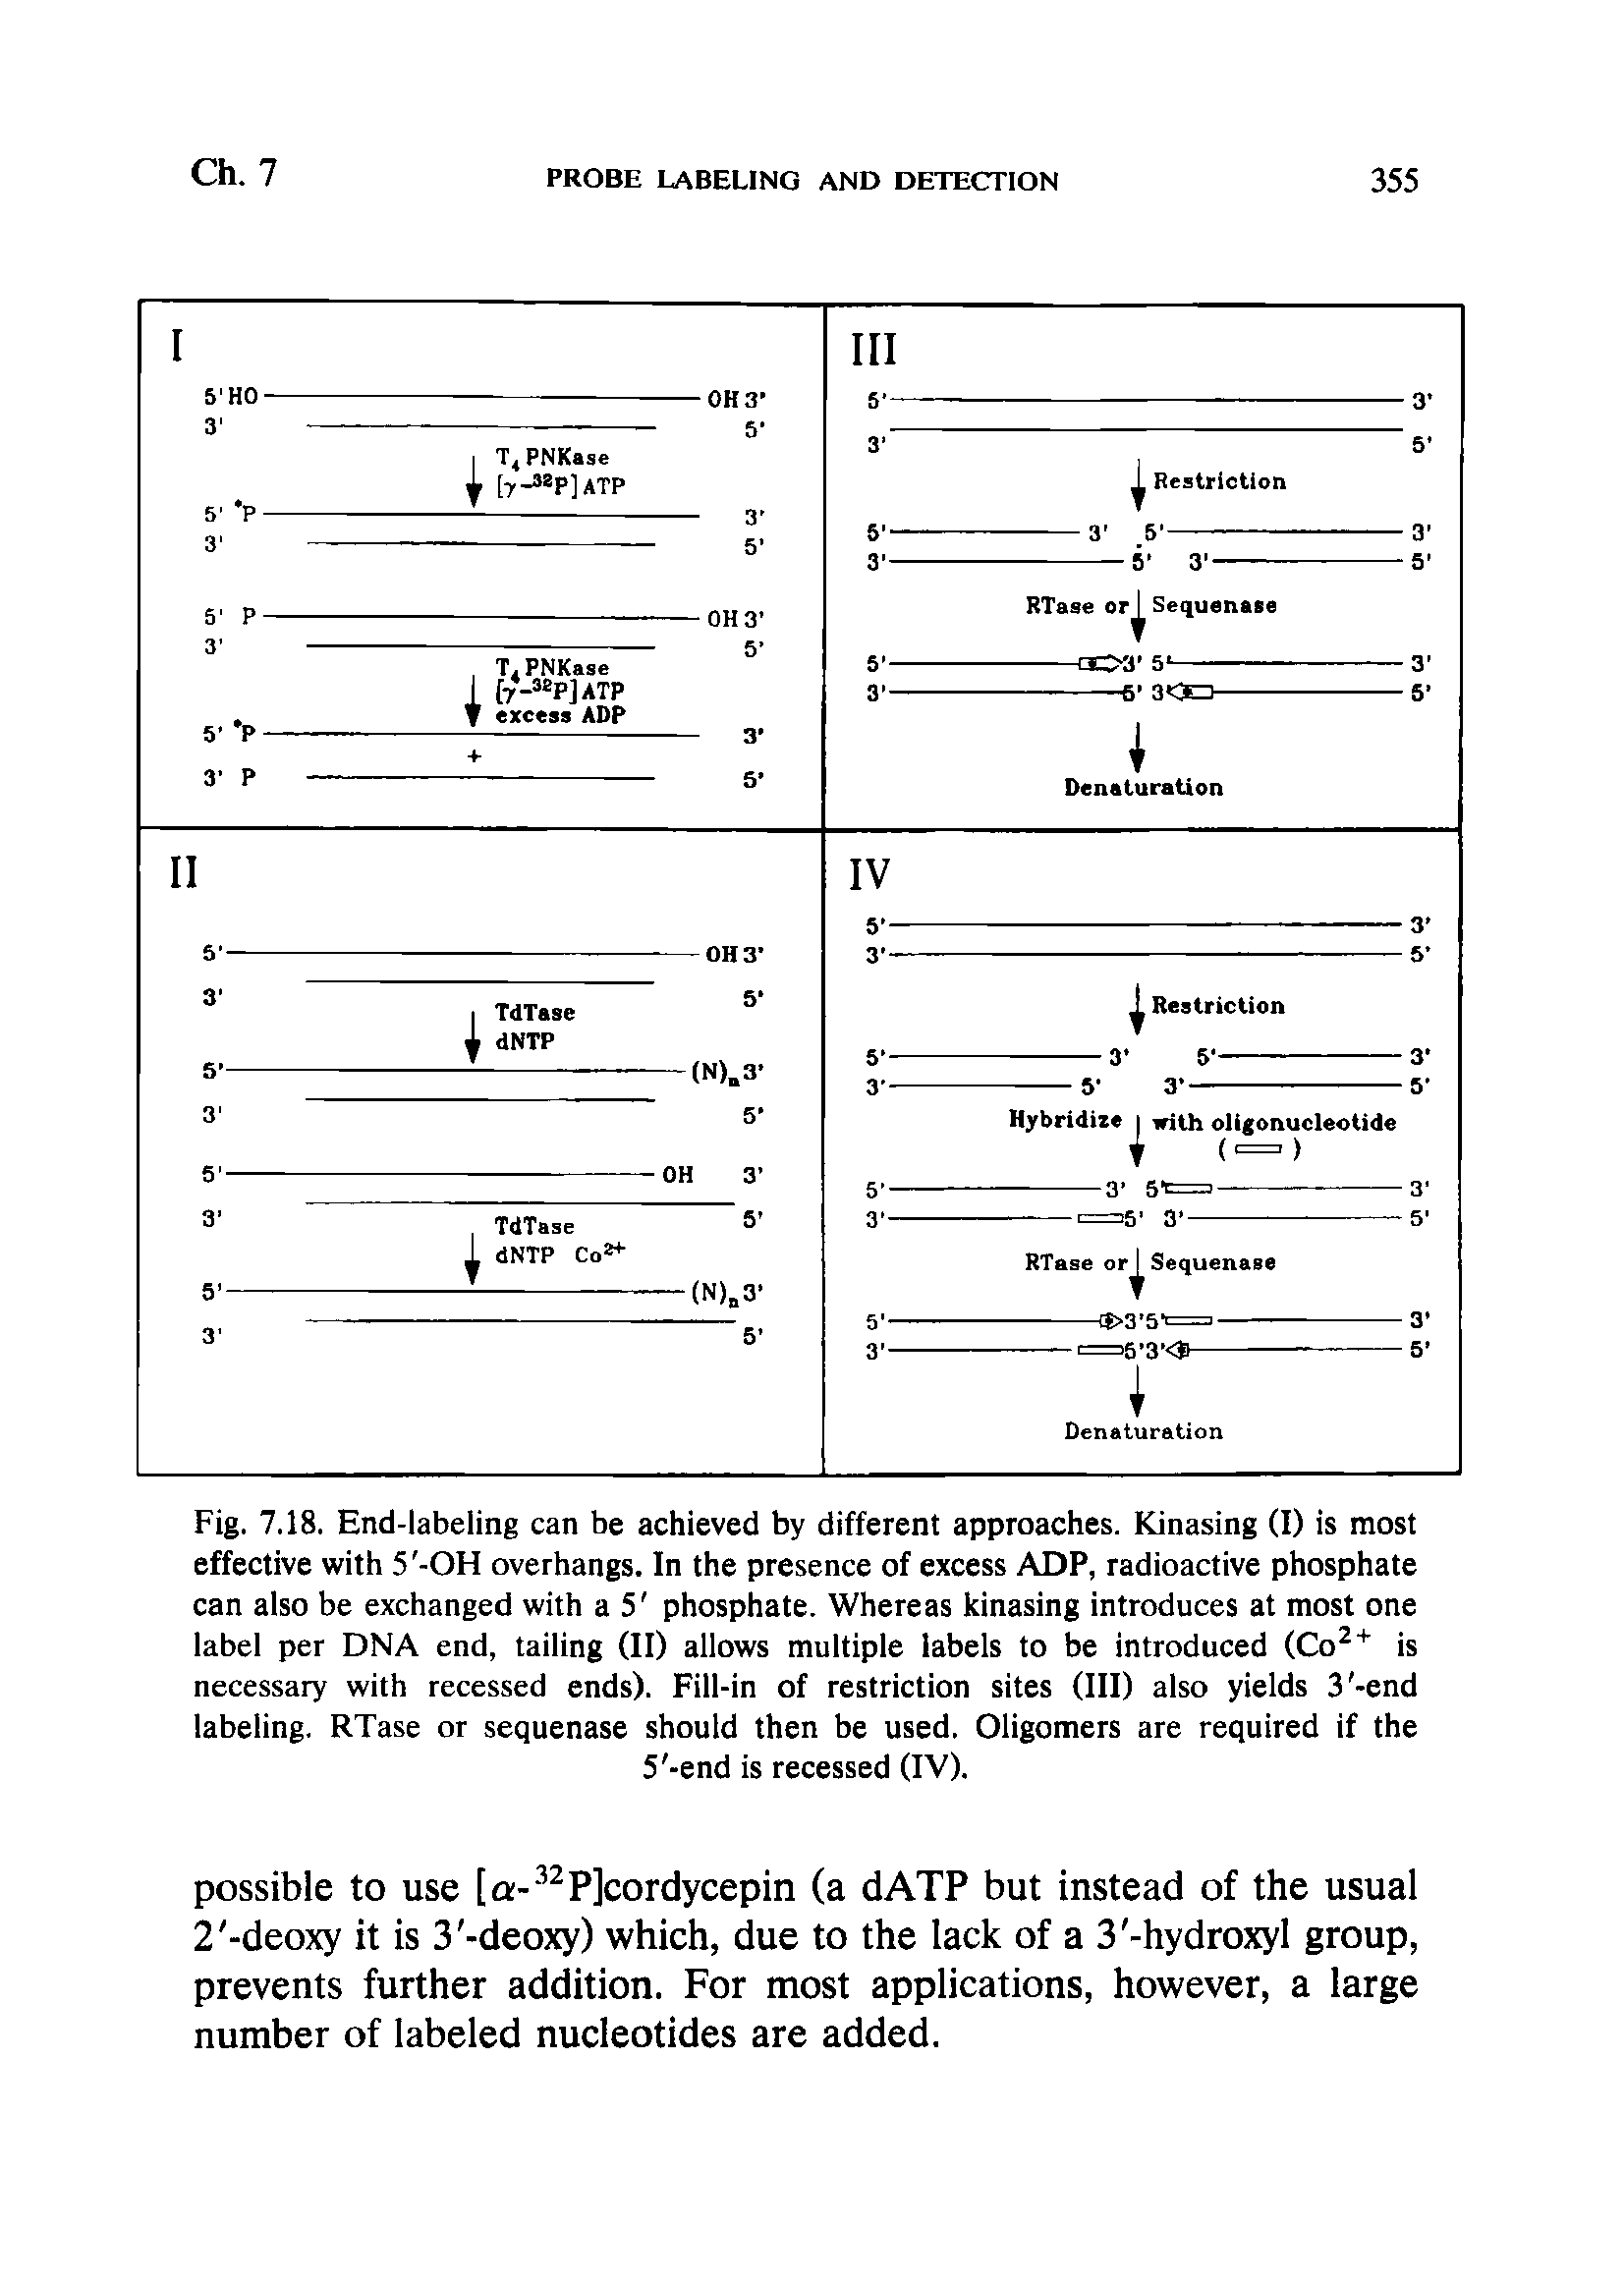 Fig. 7.18. End-labeling can be achieved by different approaches. Kinasing (I) is most effective with 5 -OH overhangs. In the presence of excess ADP, radioactive phosphate can also be exchanged with a 5 phosphate. Whereas kinasing introduces at most one label per DNA end, tailing (II) allows multiple labels to be introduced (Co is necessary with recessed ends). Fill-in of restriction sites (III) also yields 3 -end labeling. RTase or sequenase should then be used. Oligomers are required if the 5 -end is recessed (IV).